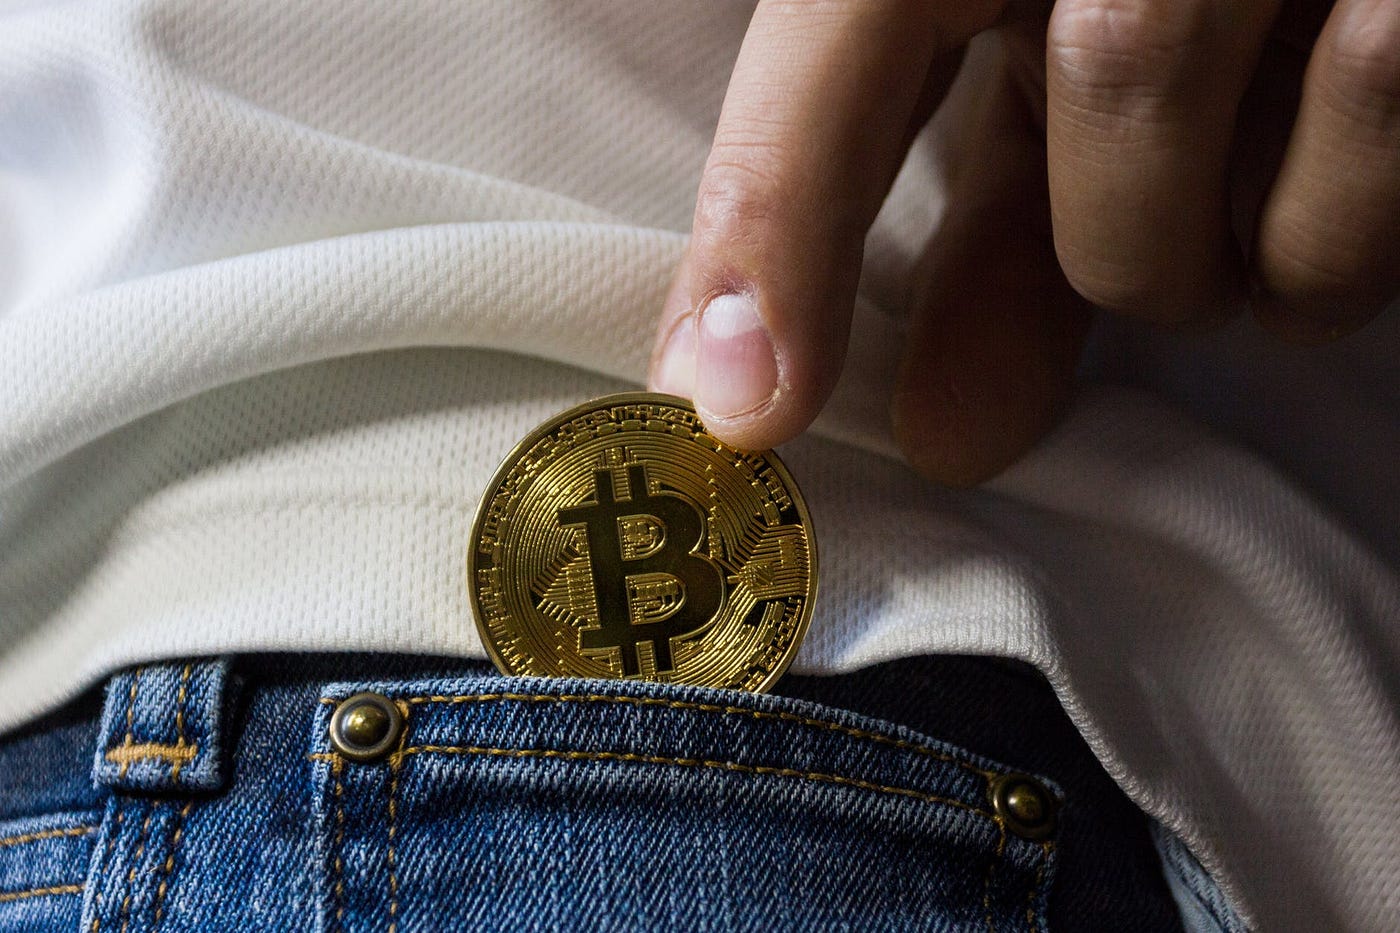 A person putting bitcoin in his pocket